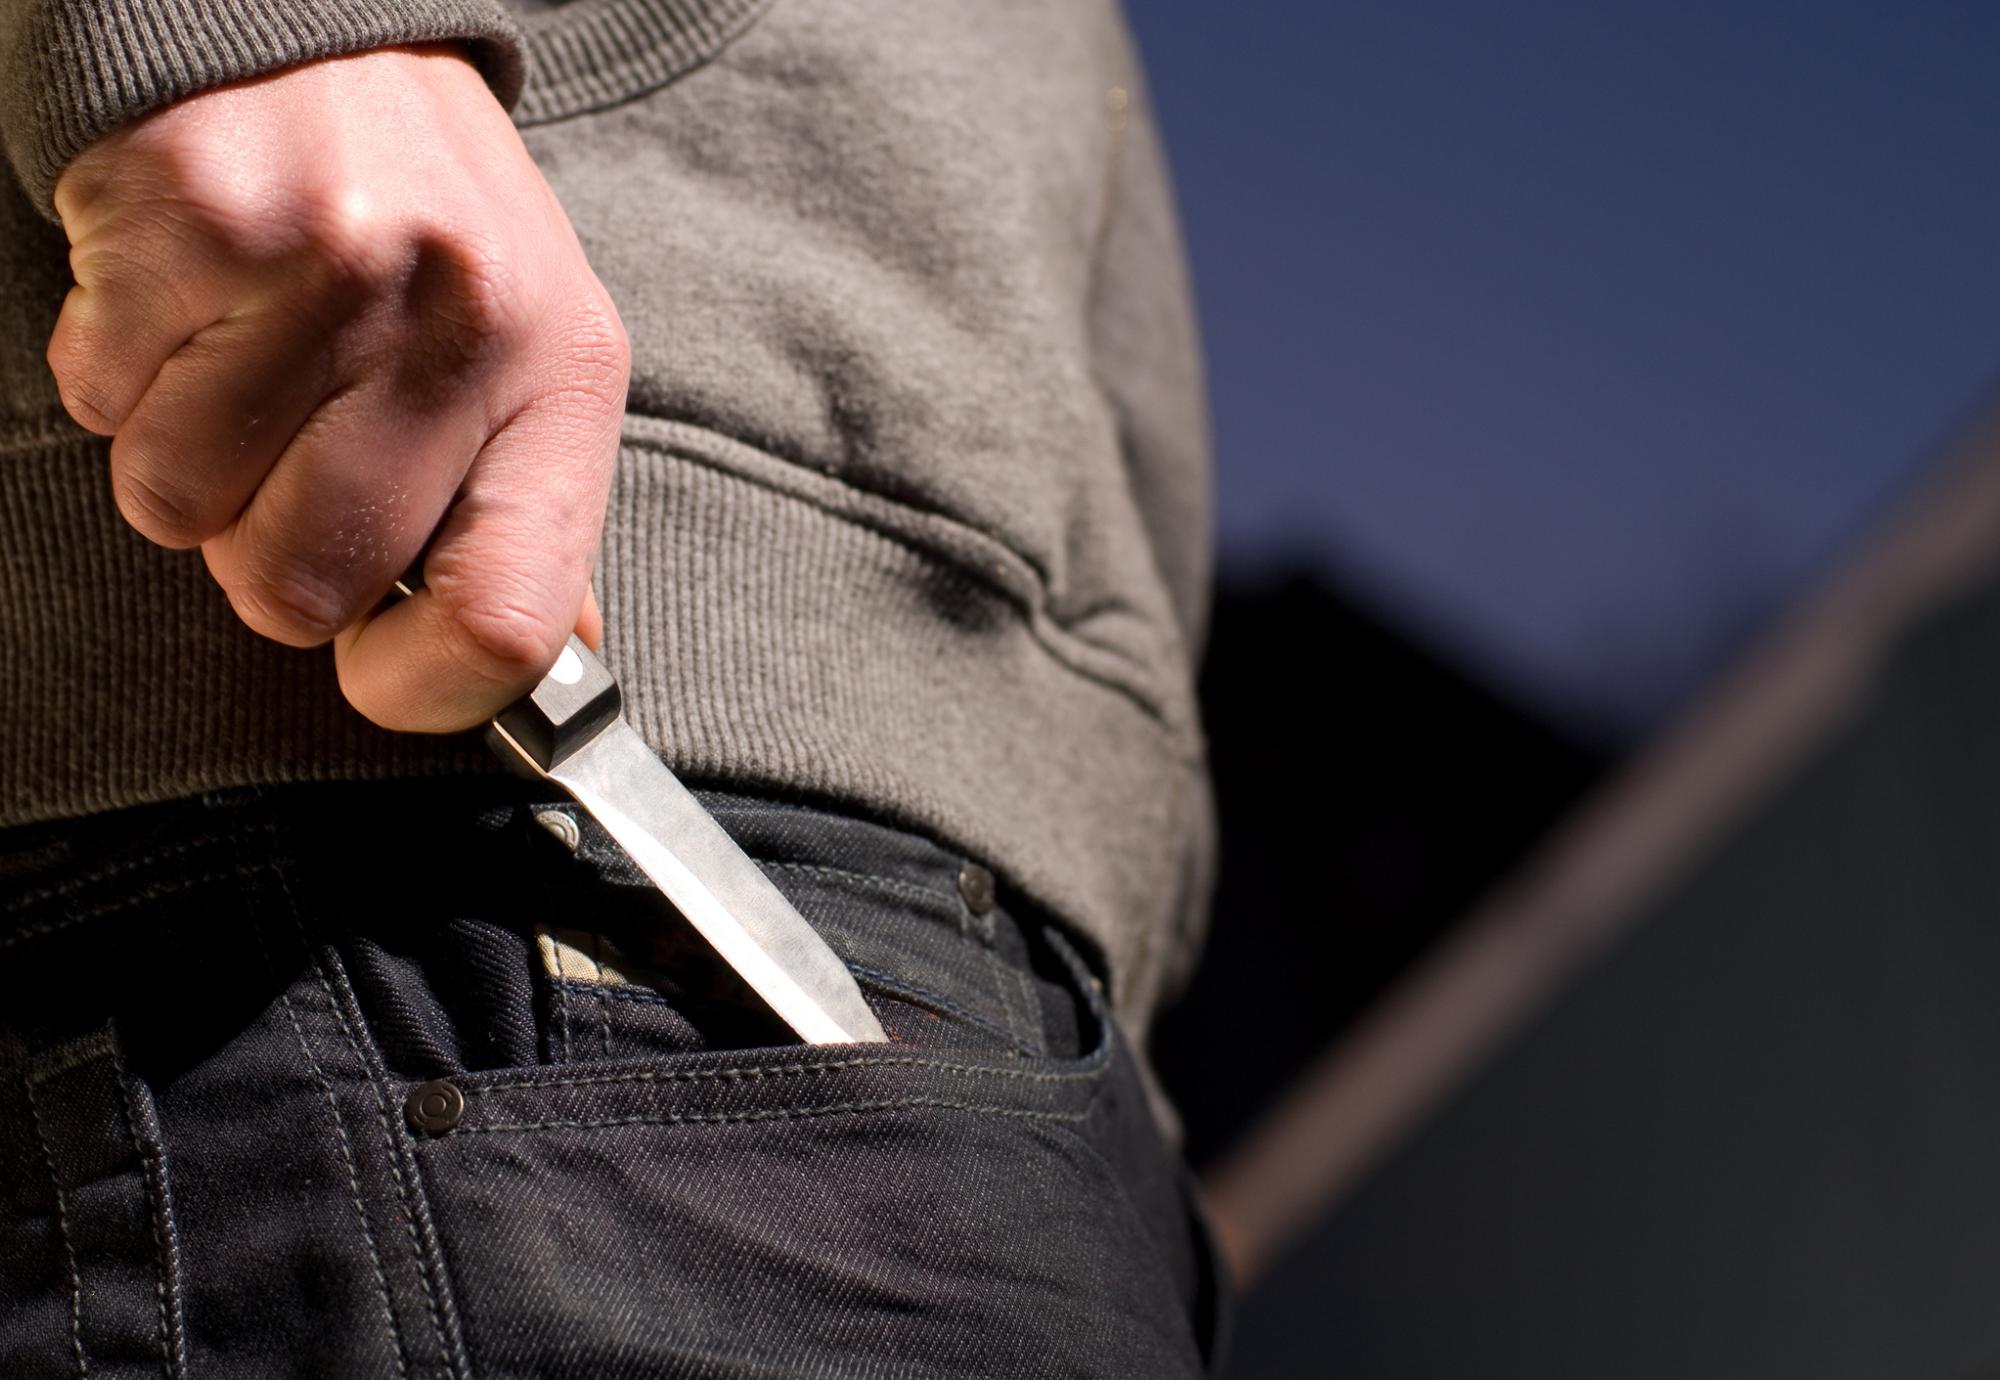 Man pulls out knife from his pocket